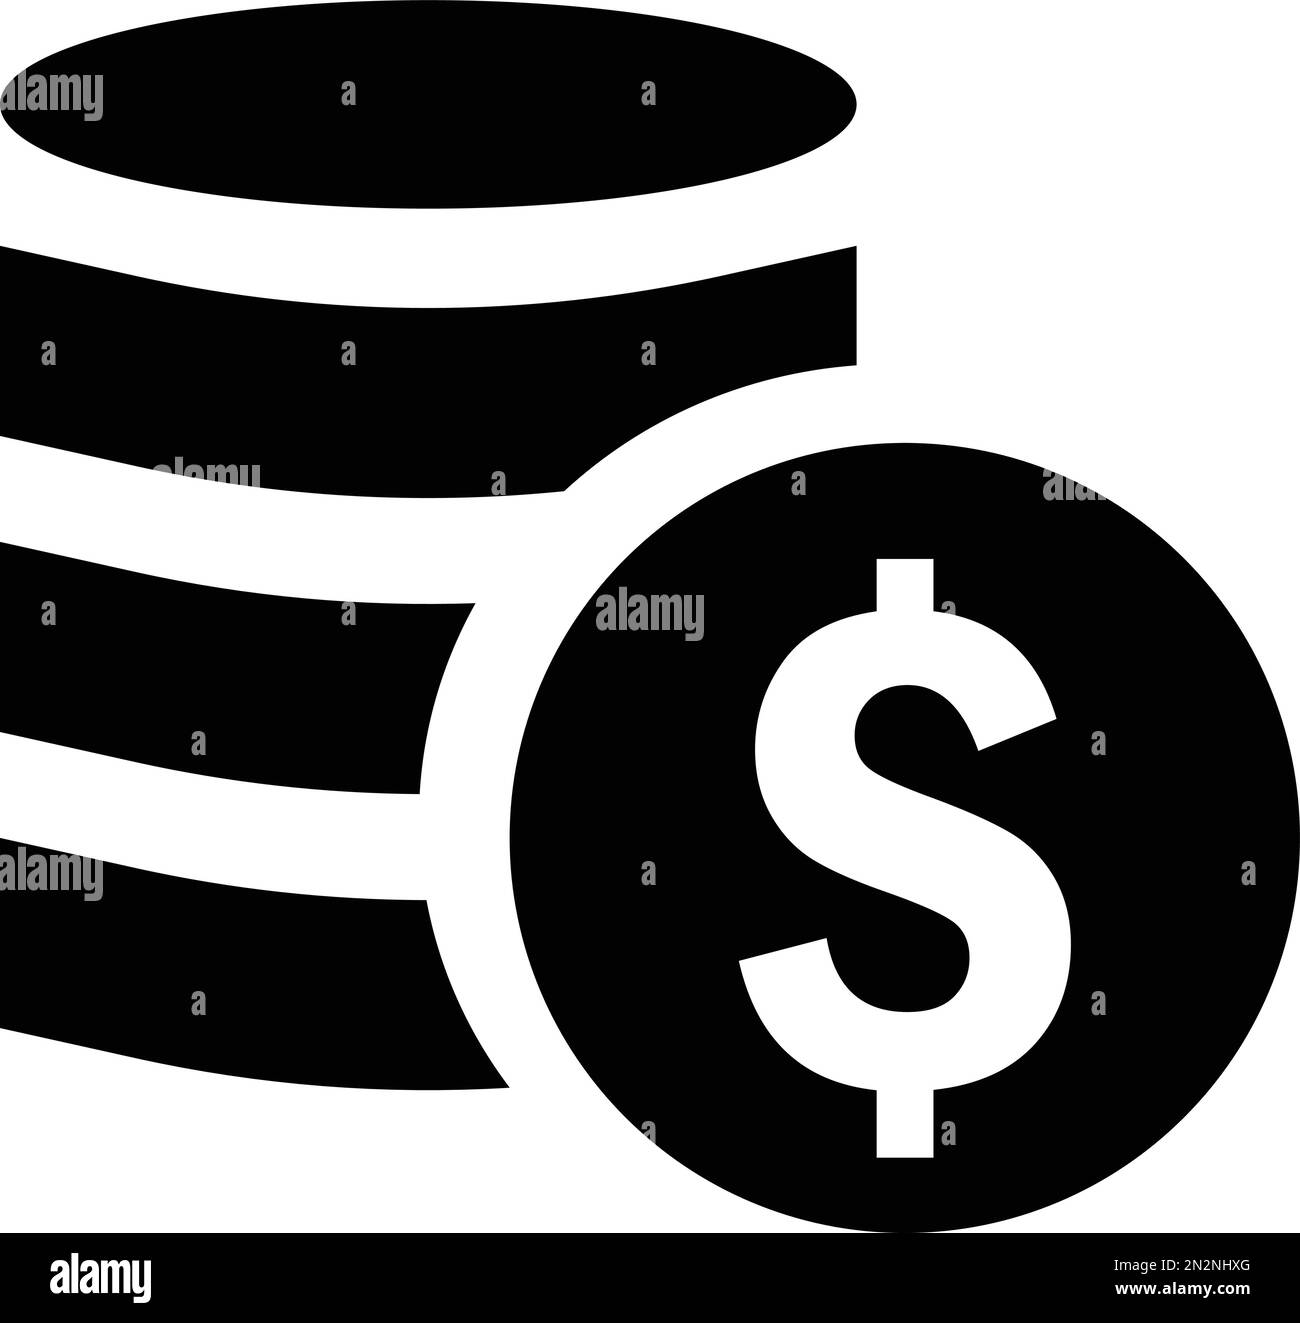 Simple Dollar coin stack in black. Finance and business icon. Money sign Stock Vector